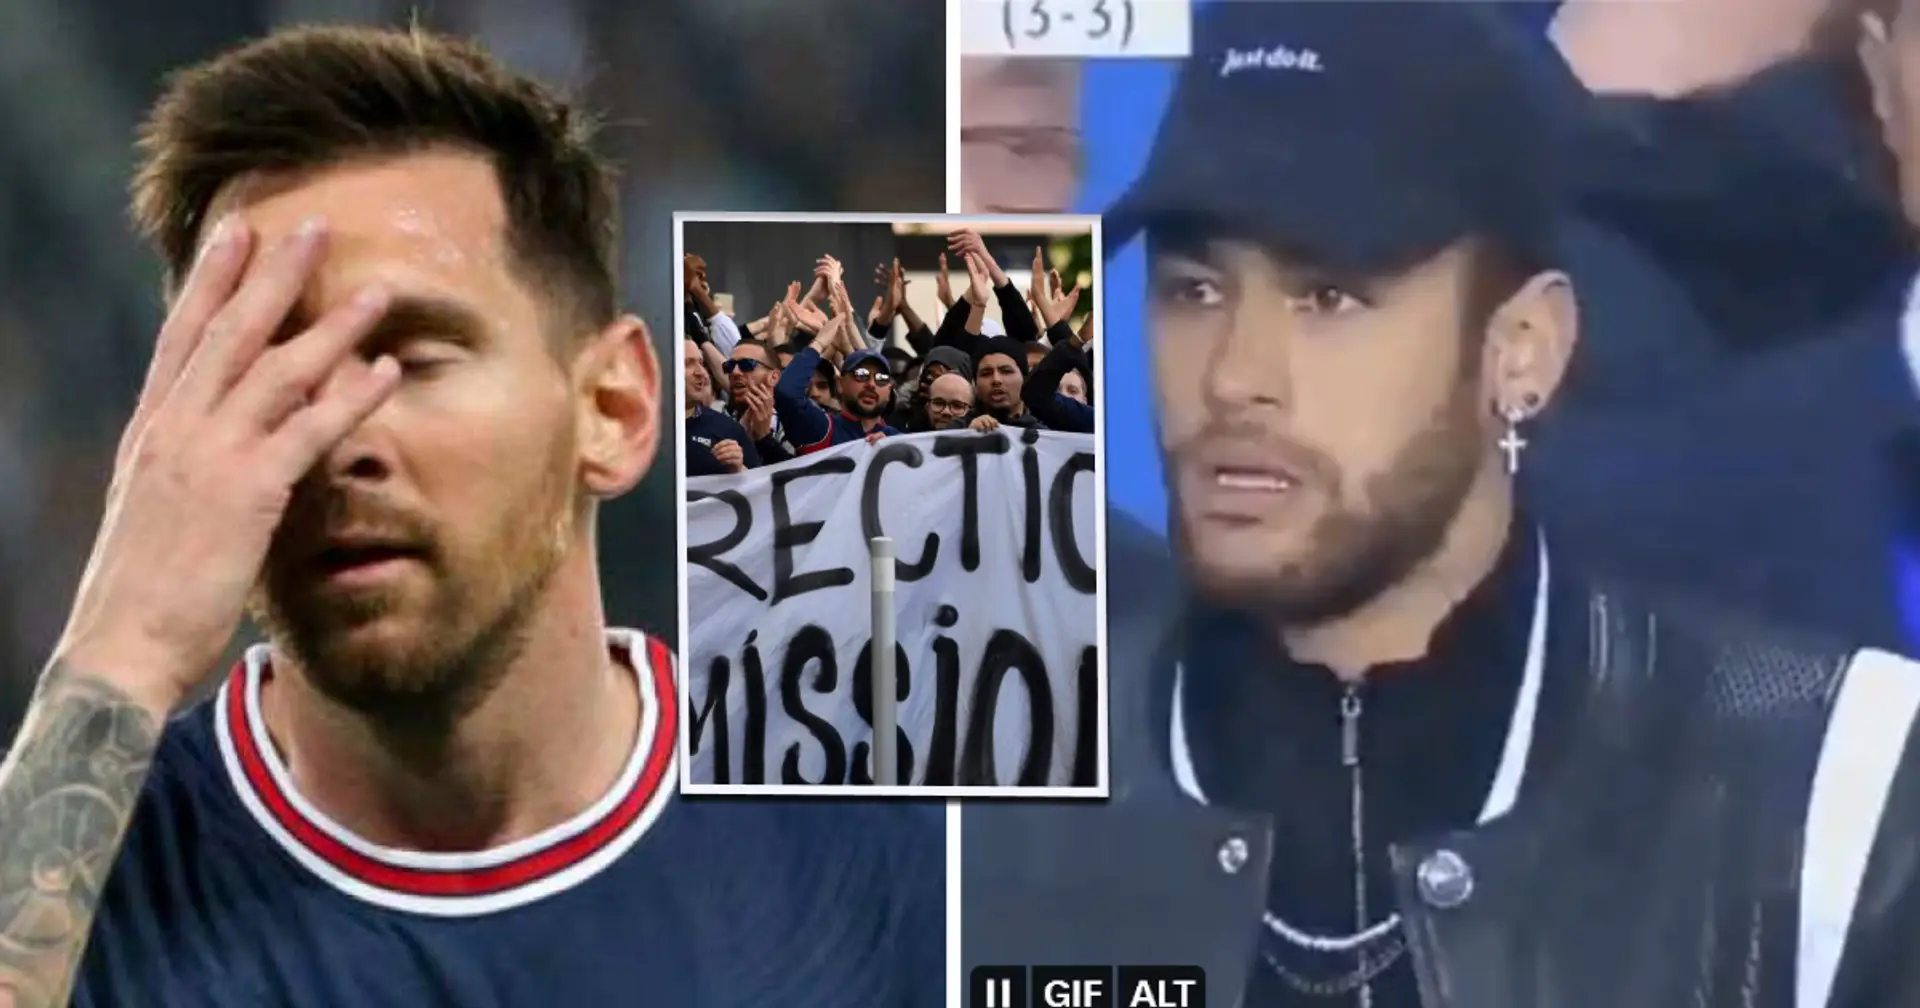 PSG fans treat Neymar worse than Messi — storm his house to demand he leaves club